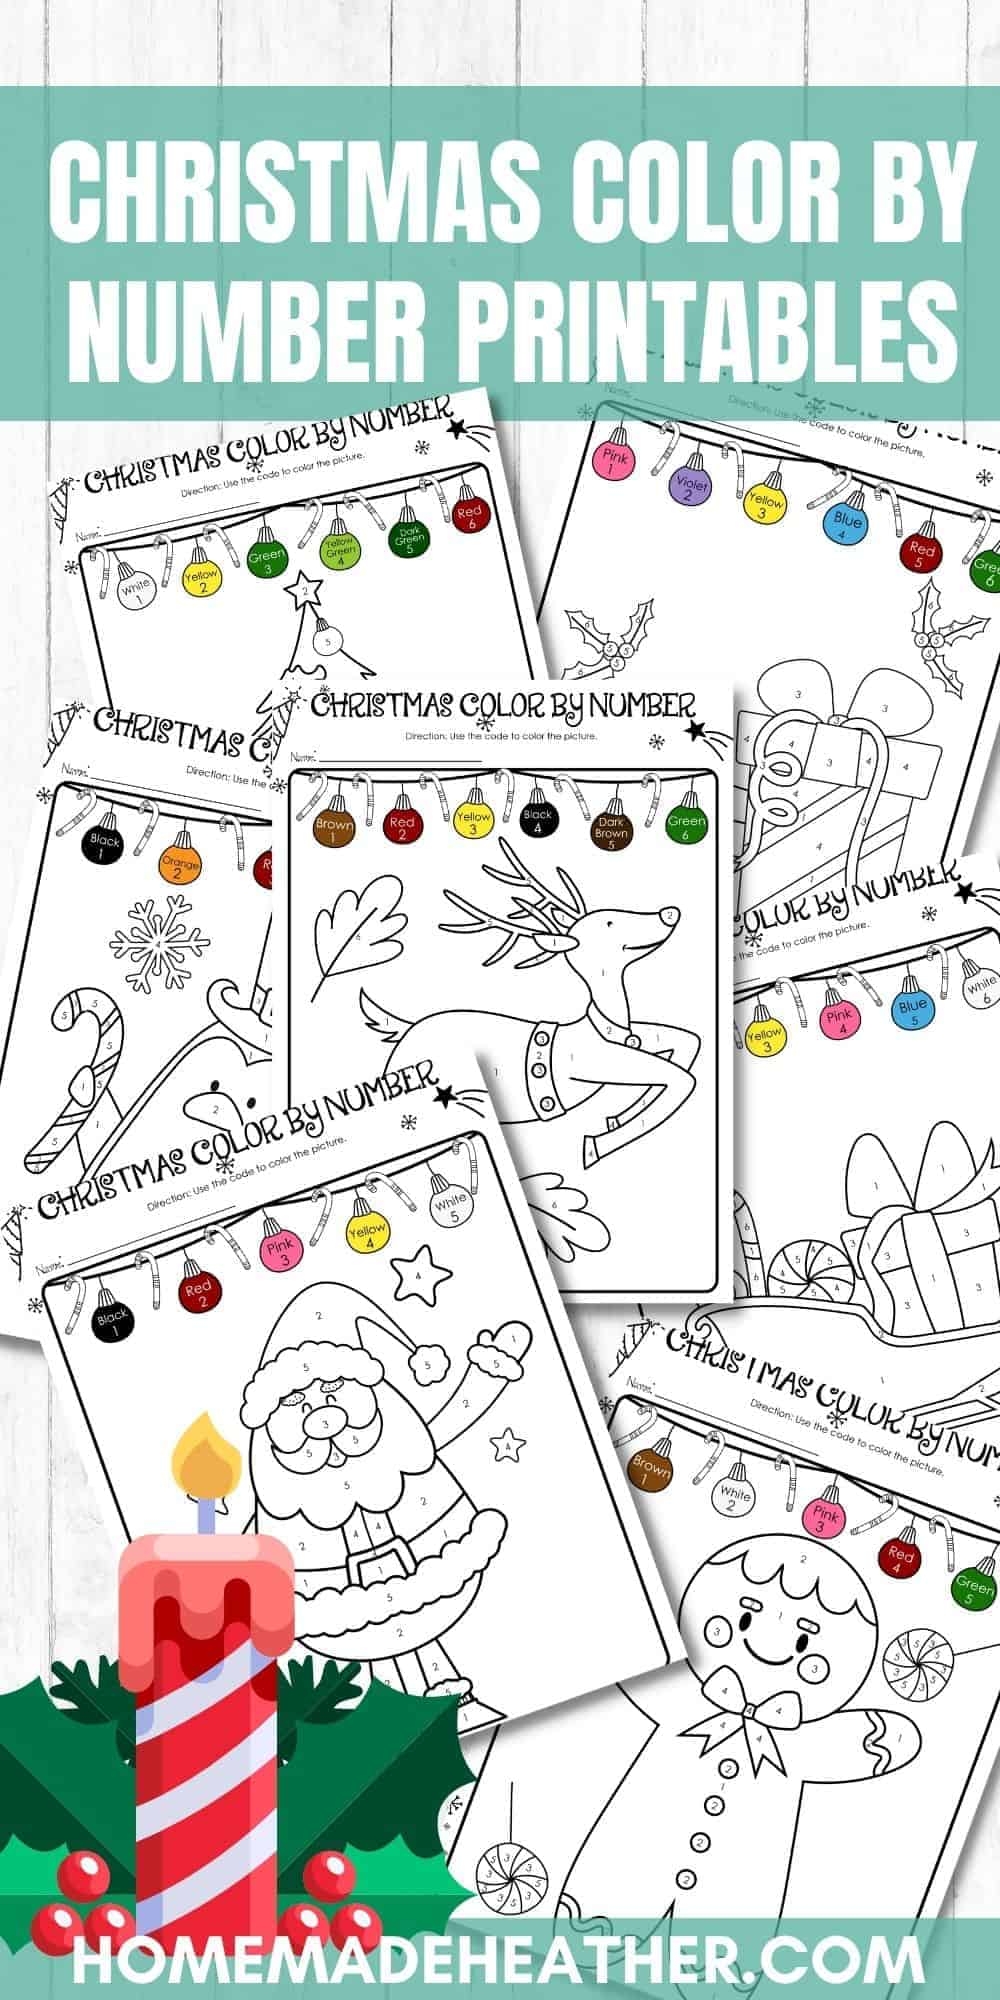 Free Christmas Color By Number Printables Homemade Heather - Free Printable Christmas Color By Number Coloring Pages